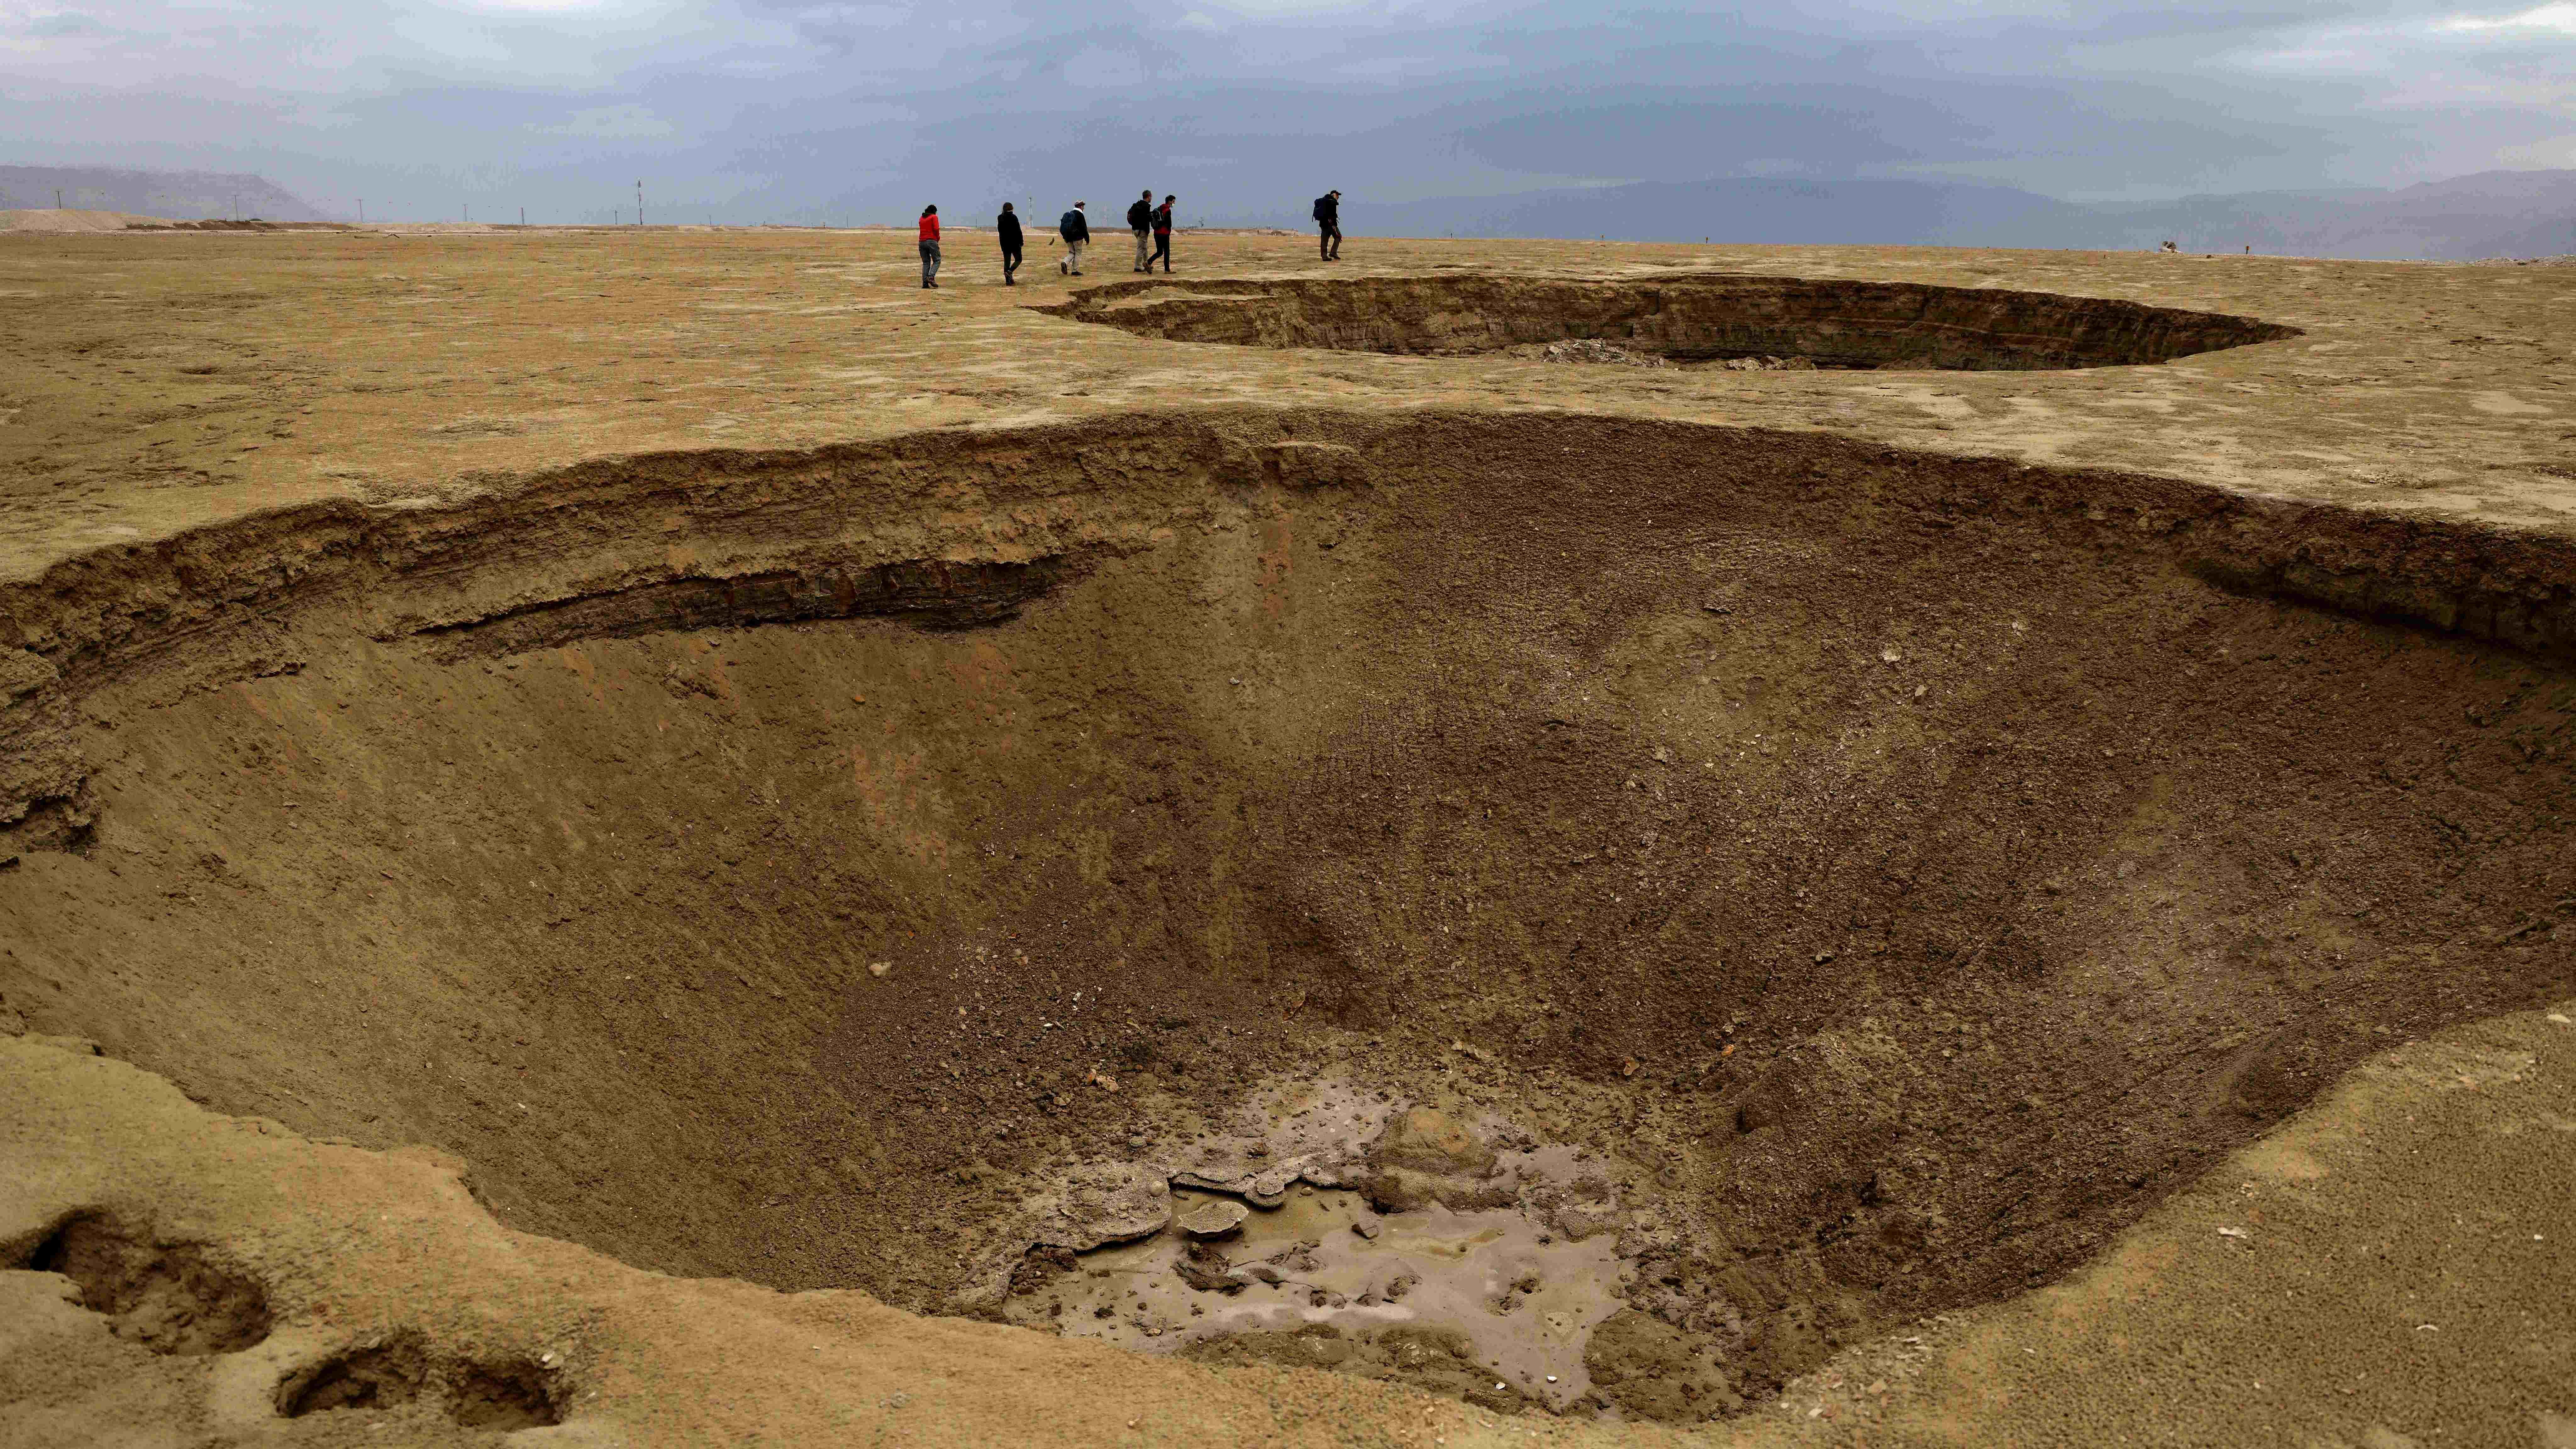 Hikers walk next to sinkholes across a dried-up sea area which exposed and created a salt plain, some 20 Km south of the Israeli Kibbutz Ein Gedi in the southern part of the Dead Sea. Credit: AFP Photo